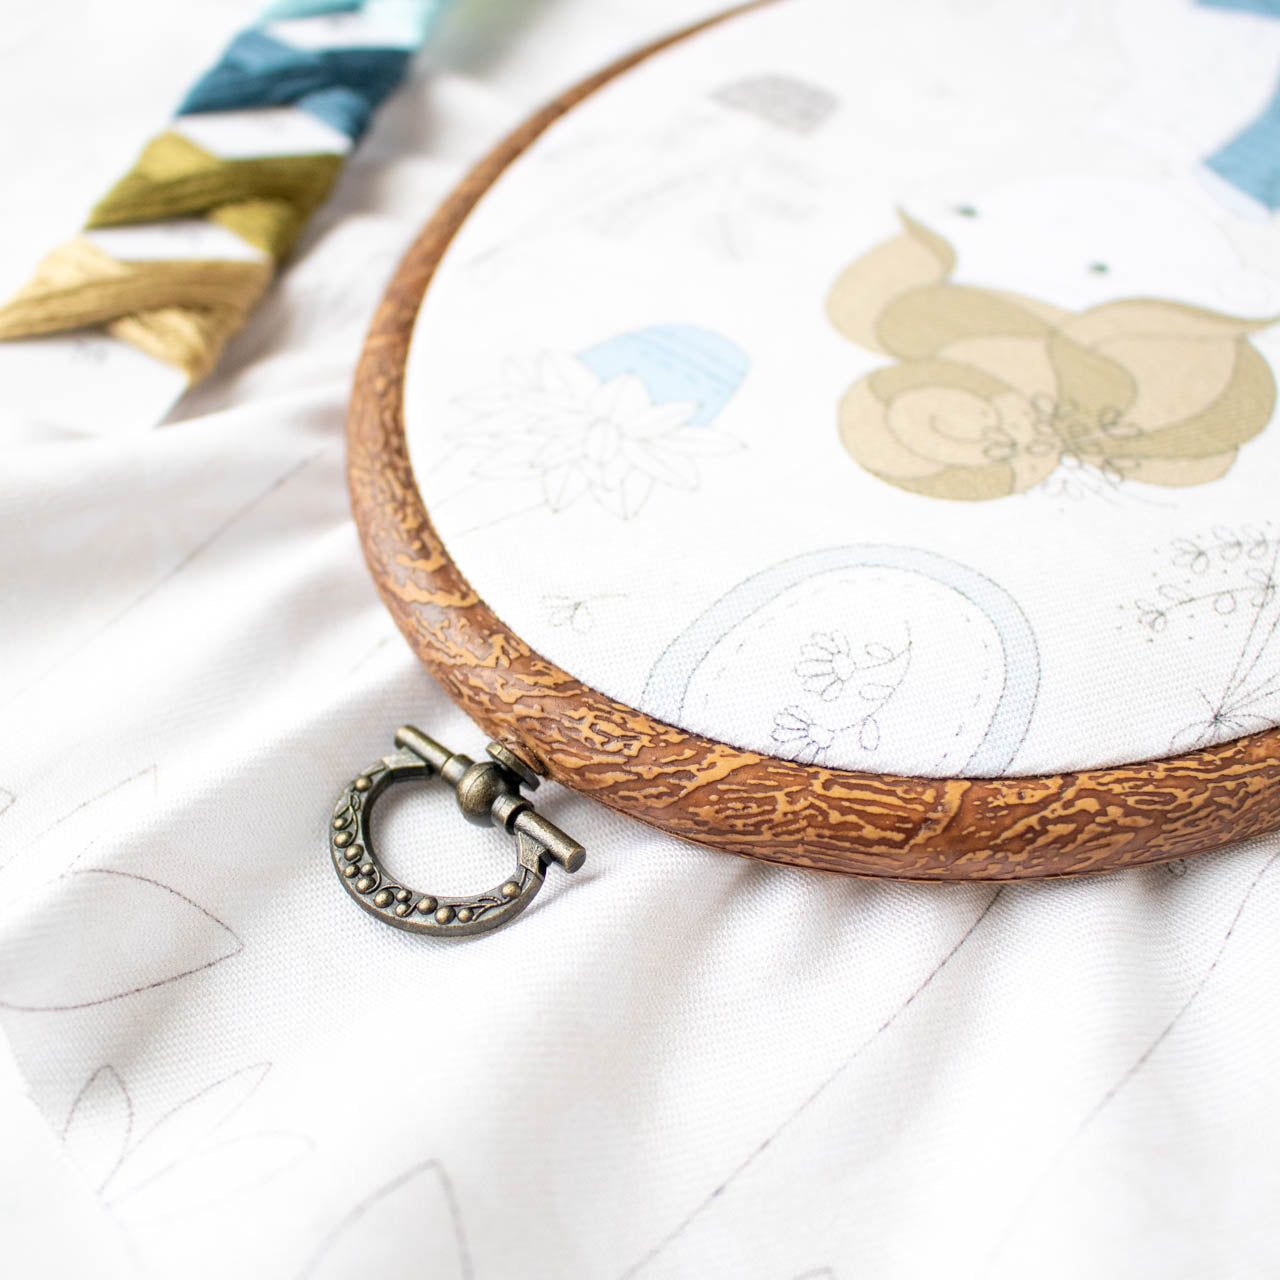 Embroidery Hoop Oval 3 Inch / Embroidery Frame / Oval Hoop / Cross Stitch  Hoop// Cross Stitch Frame // Sewing Accessories // Flexi Hoop